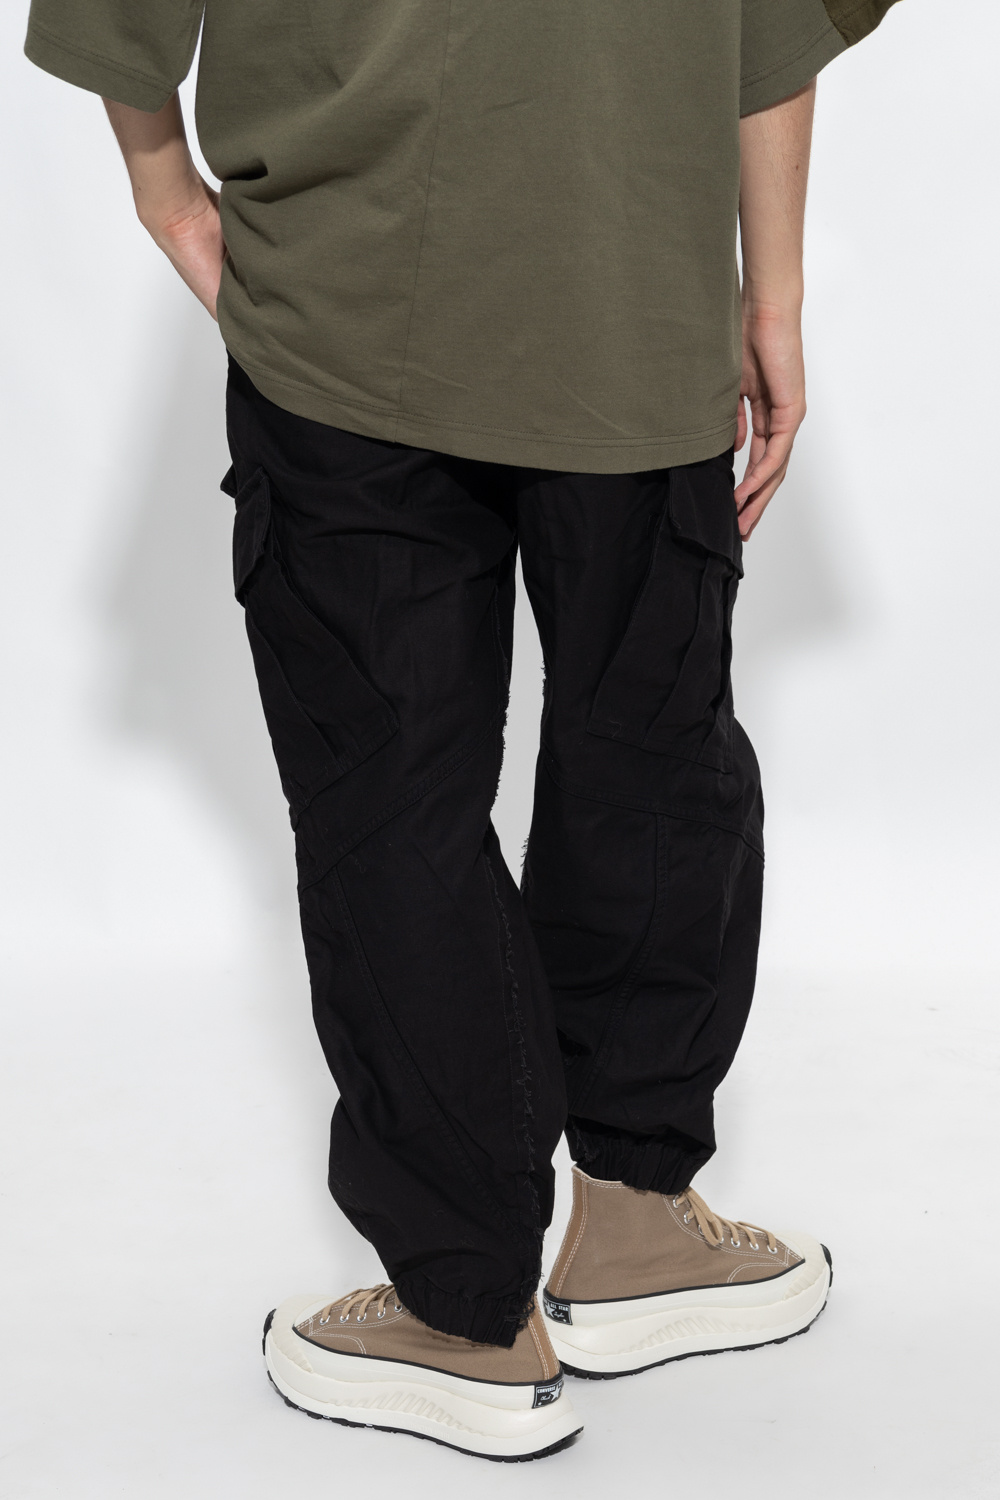 Undercover trousers perfect with pockets